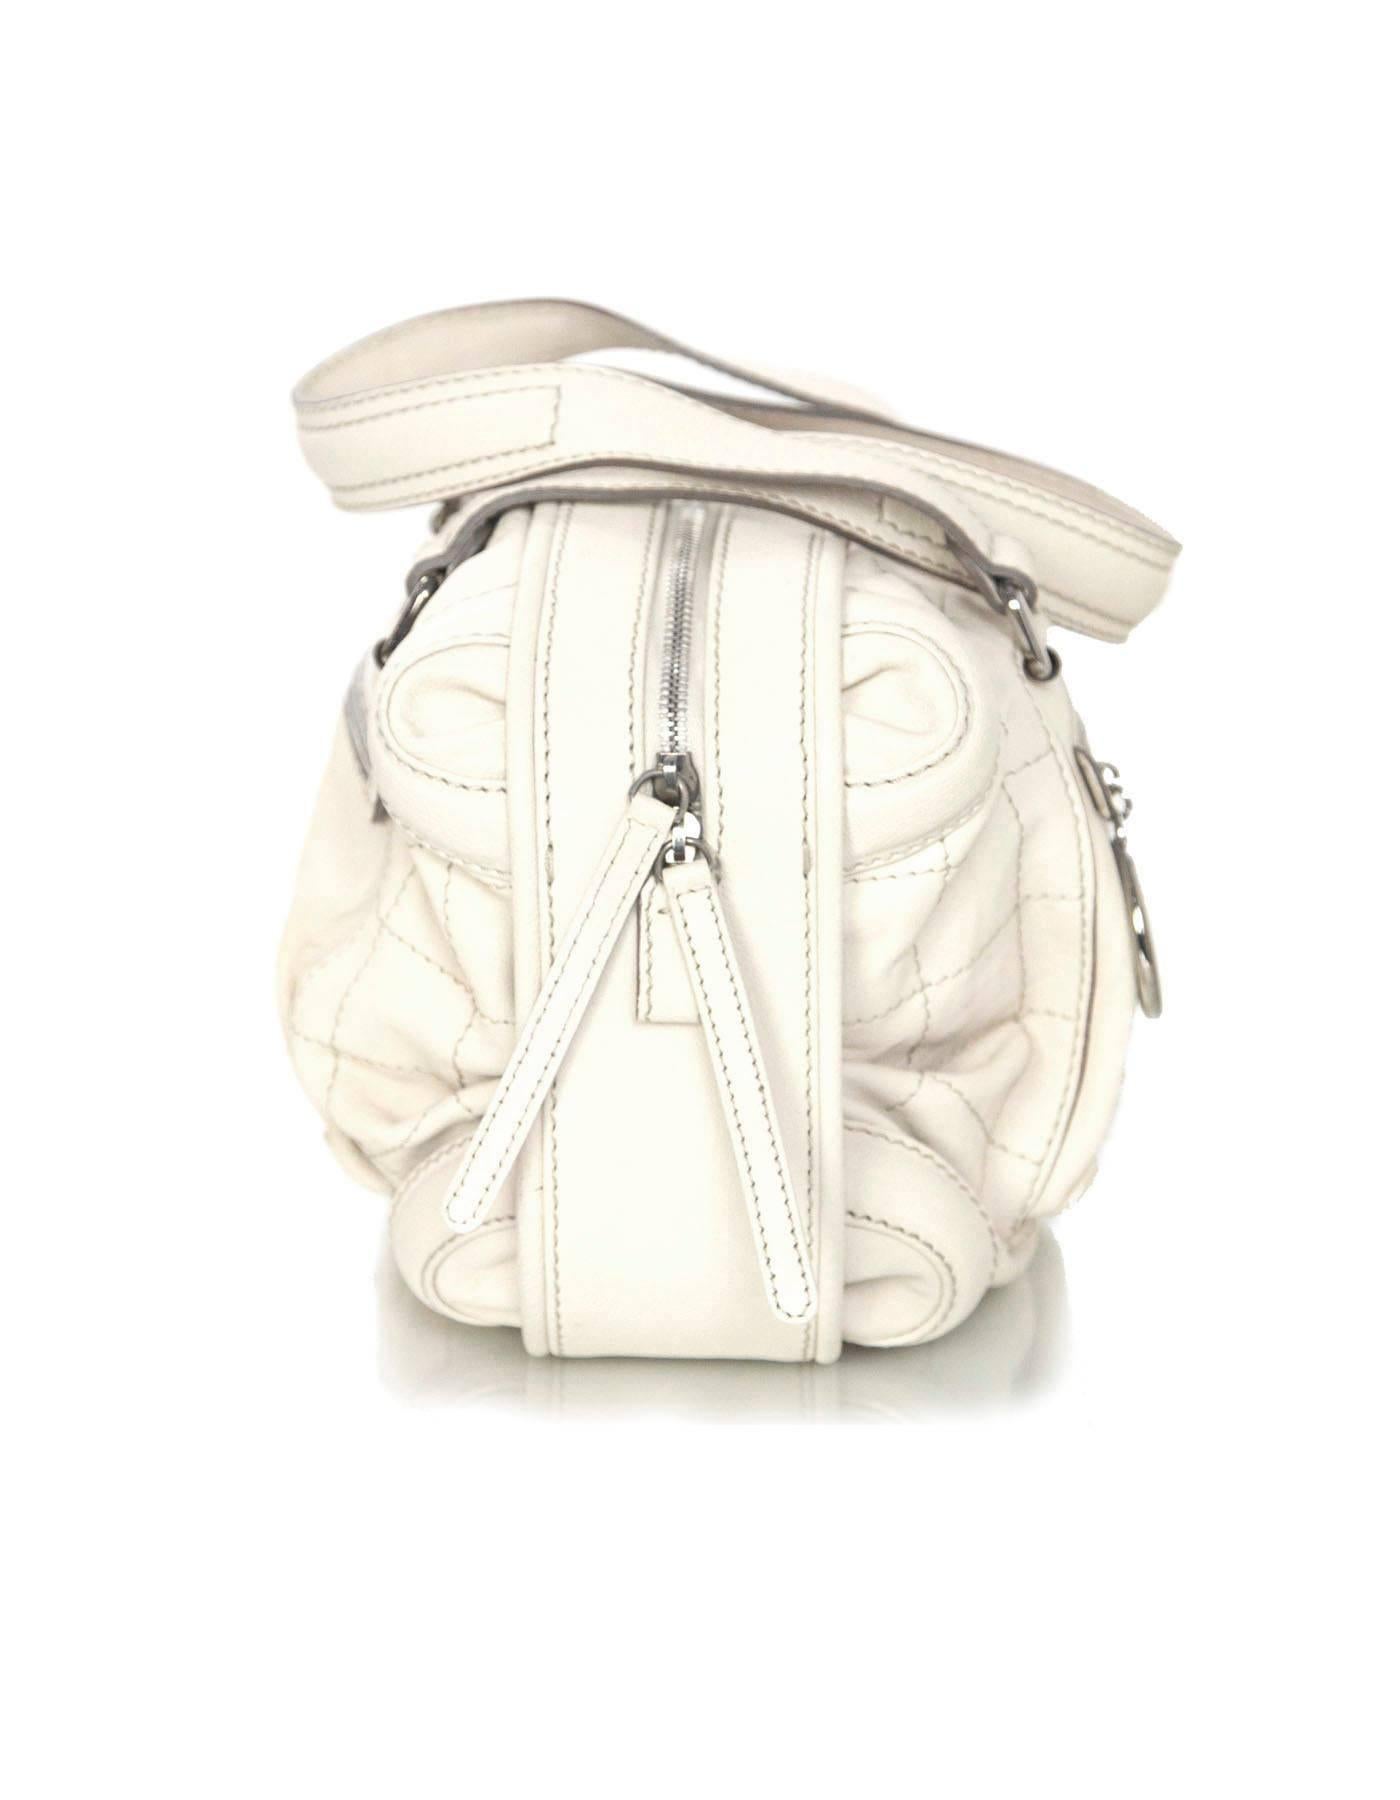 Chanel Cream Leather Bowler Bag 
Features large silvertone CC charm at front pocket zipper

Made In: Italy
Year of Production: 2006
Color: Cream
Hardware: Silvertone
Materials: Leather
Lining: Beige canvas
Closure/Opening: Zip across